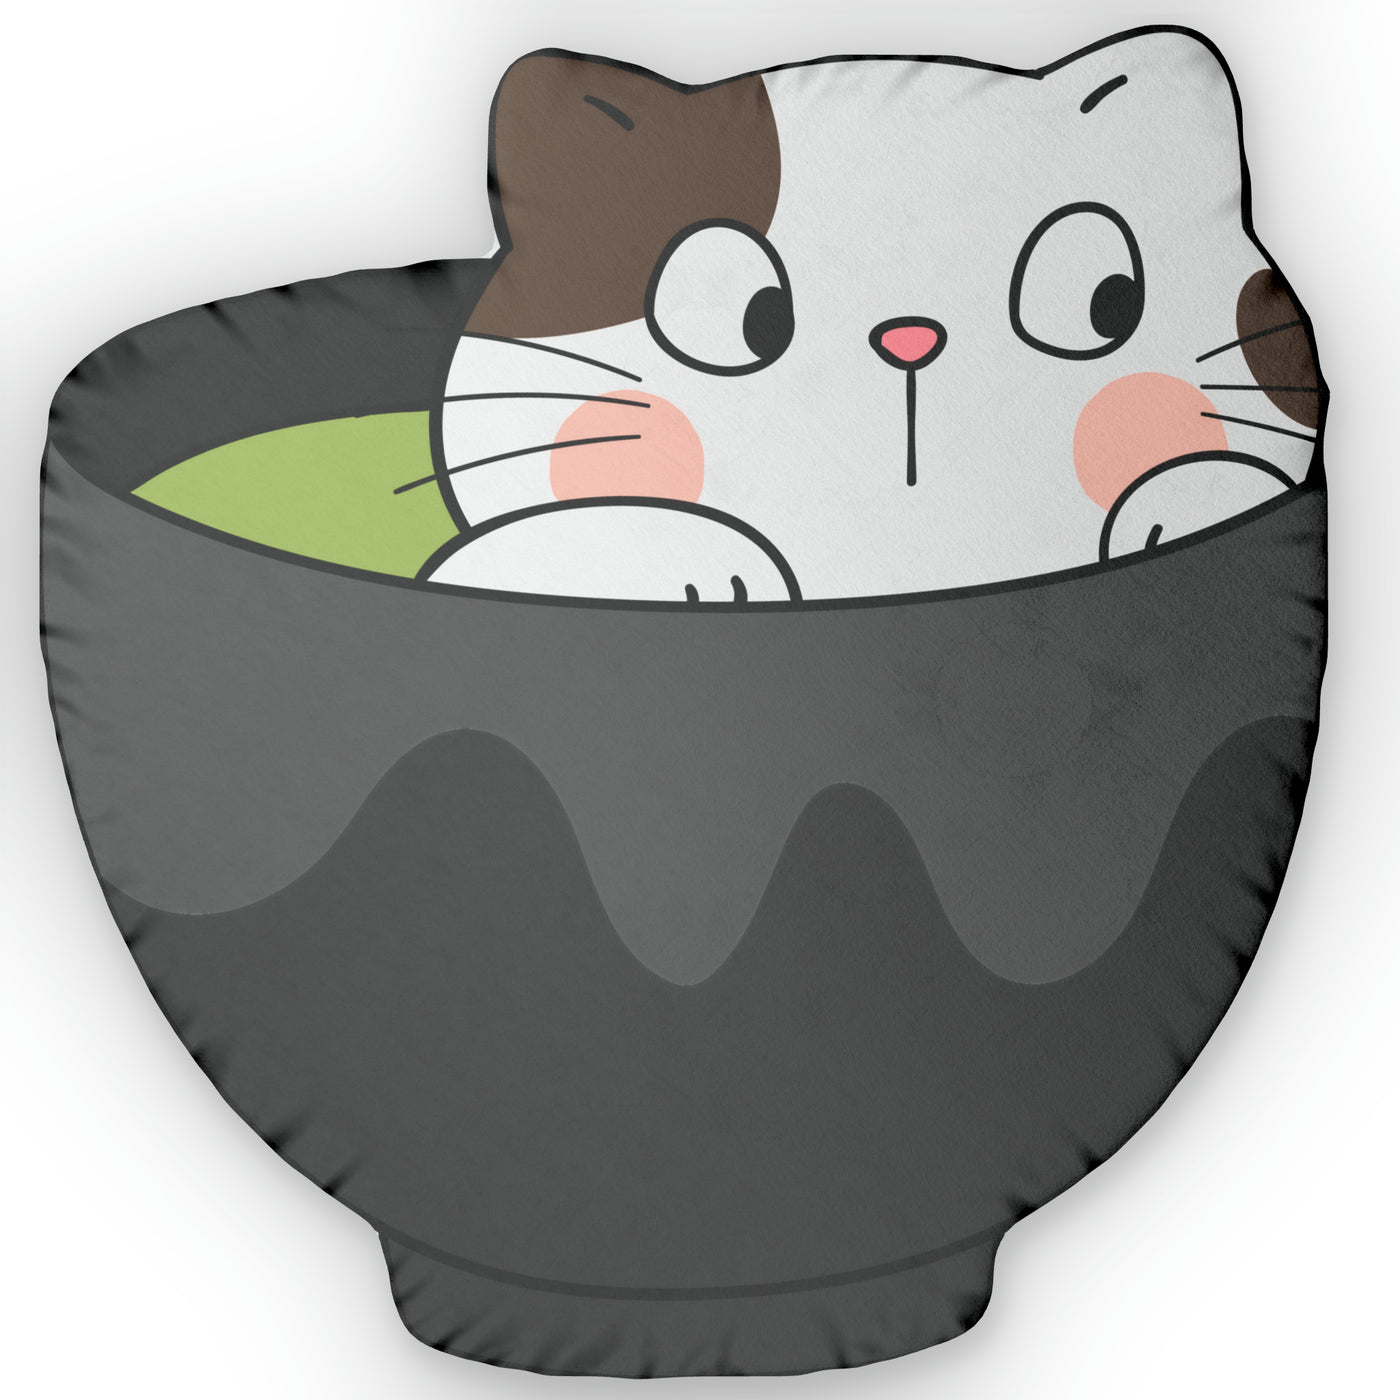 CUTE CAT BOWL Custom Shaped Flat Pillows - Up to 26 inches